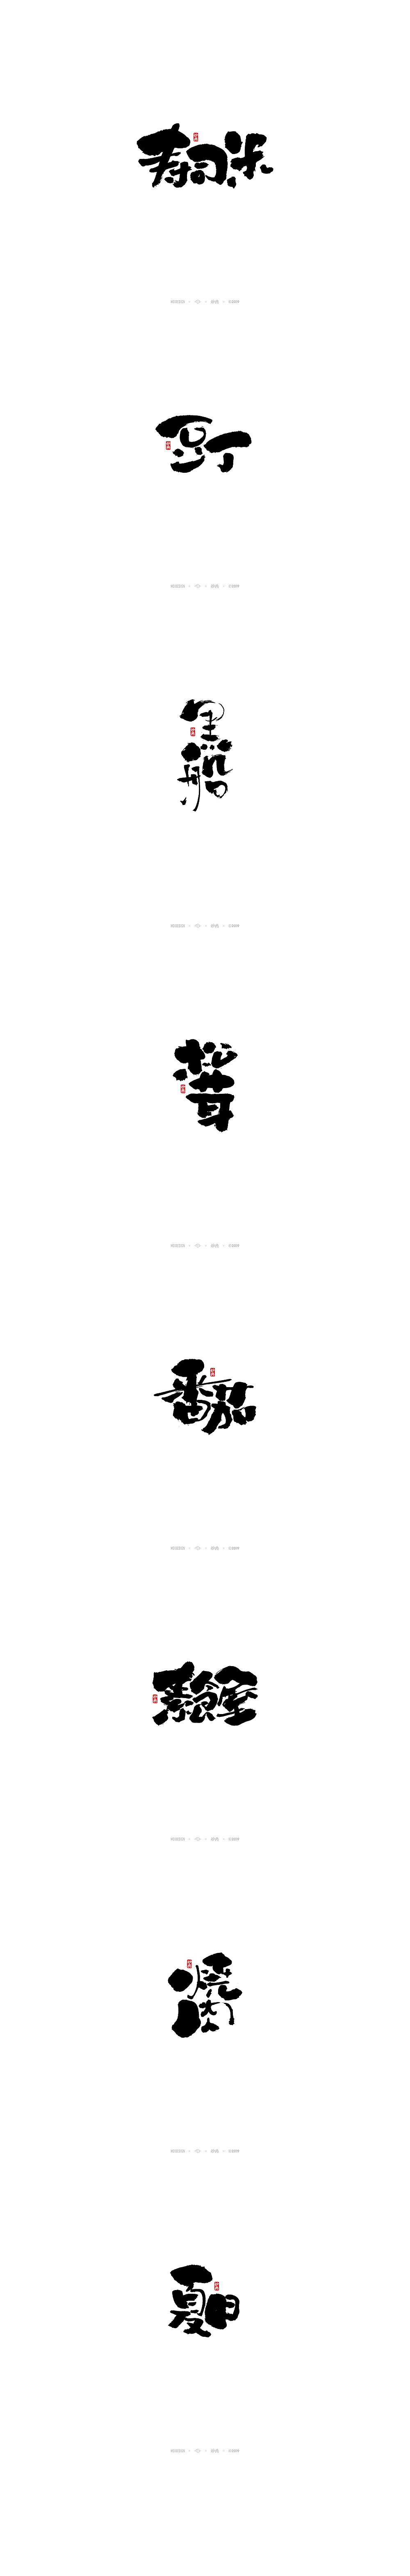 6P Different Expressions of Six Chinese Handwritten Calligraphy Fonts